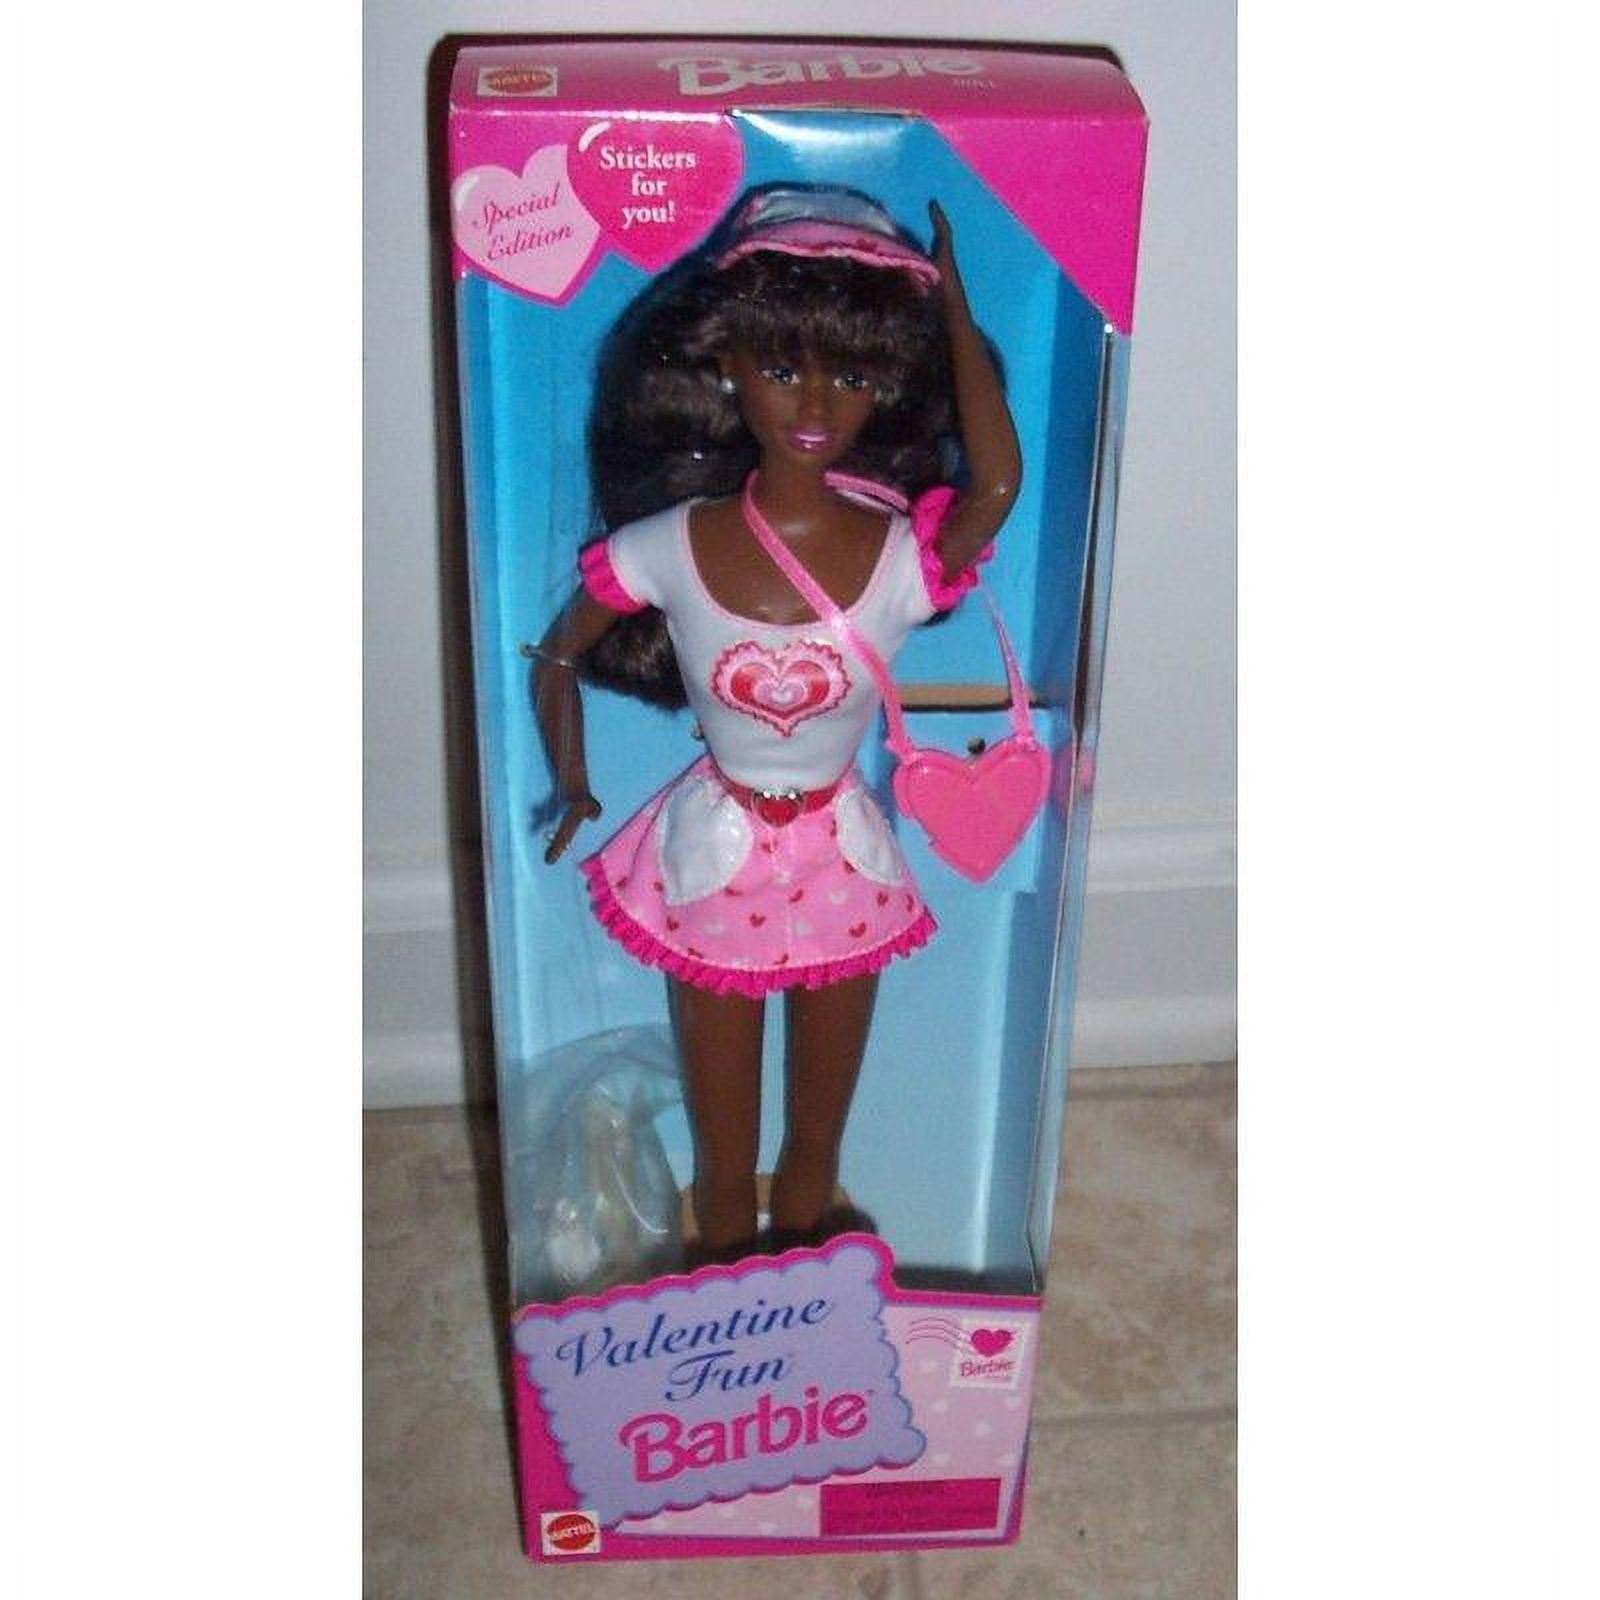 BARBIE REWIND 80'S EDITION AFRICAN AMERICAN BLACK DOLL GYM WORKOUT